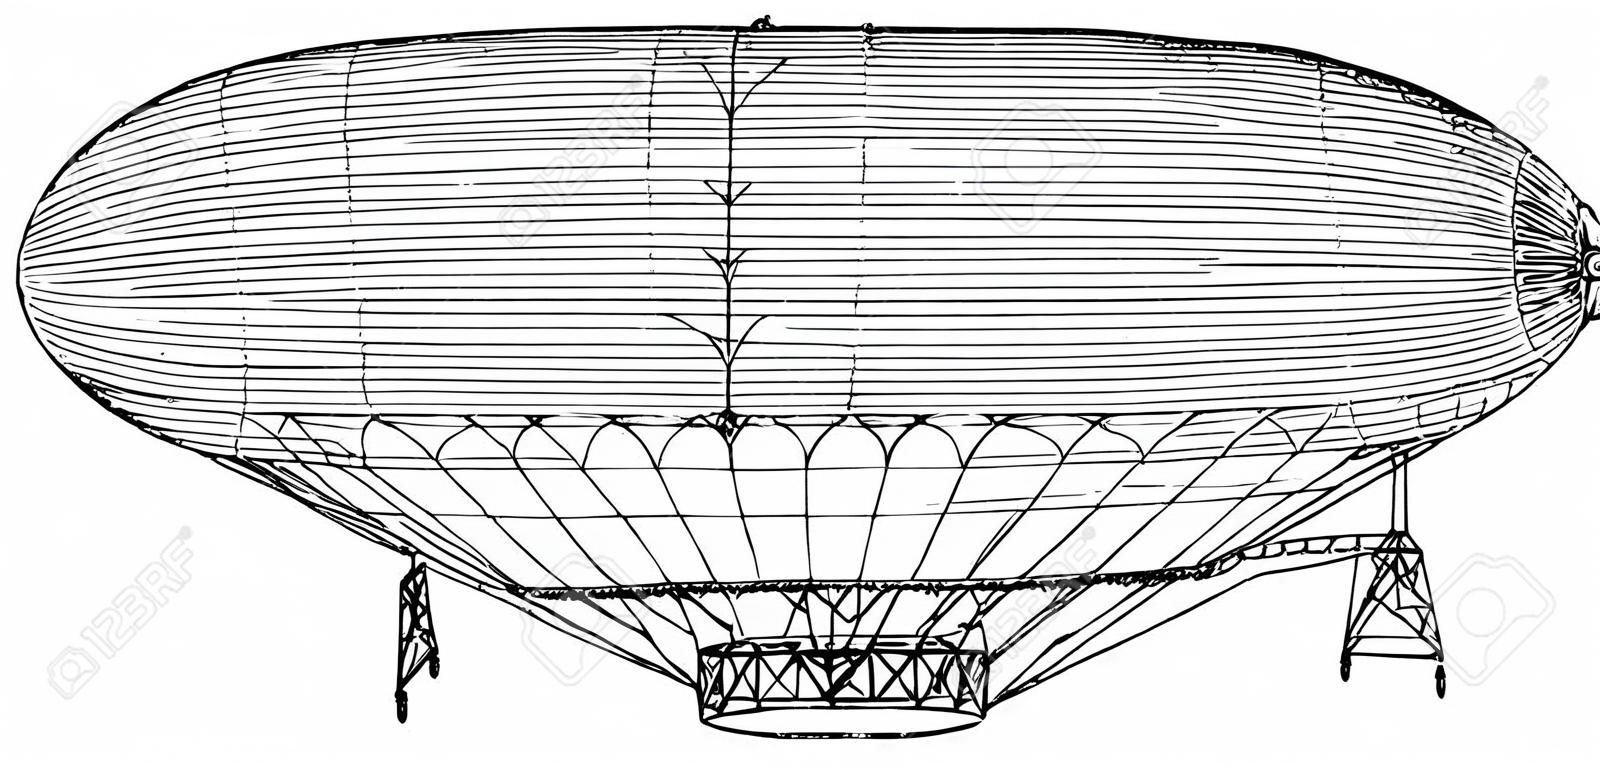 Dirigible Balloon successfully equipped with a powerful oil engine, vintage line drawing or engraving illustration.